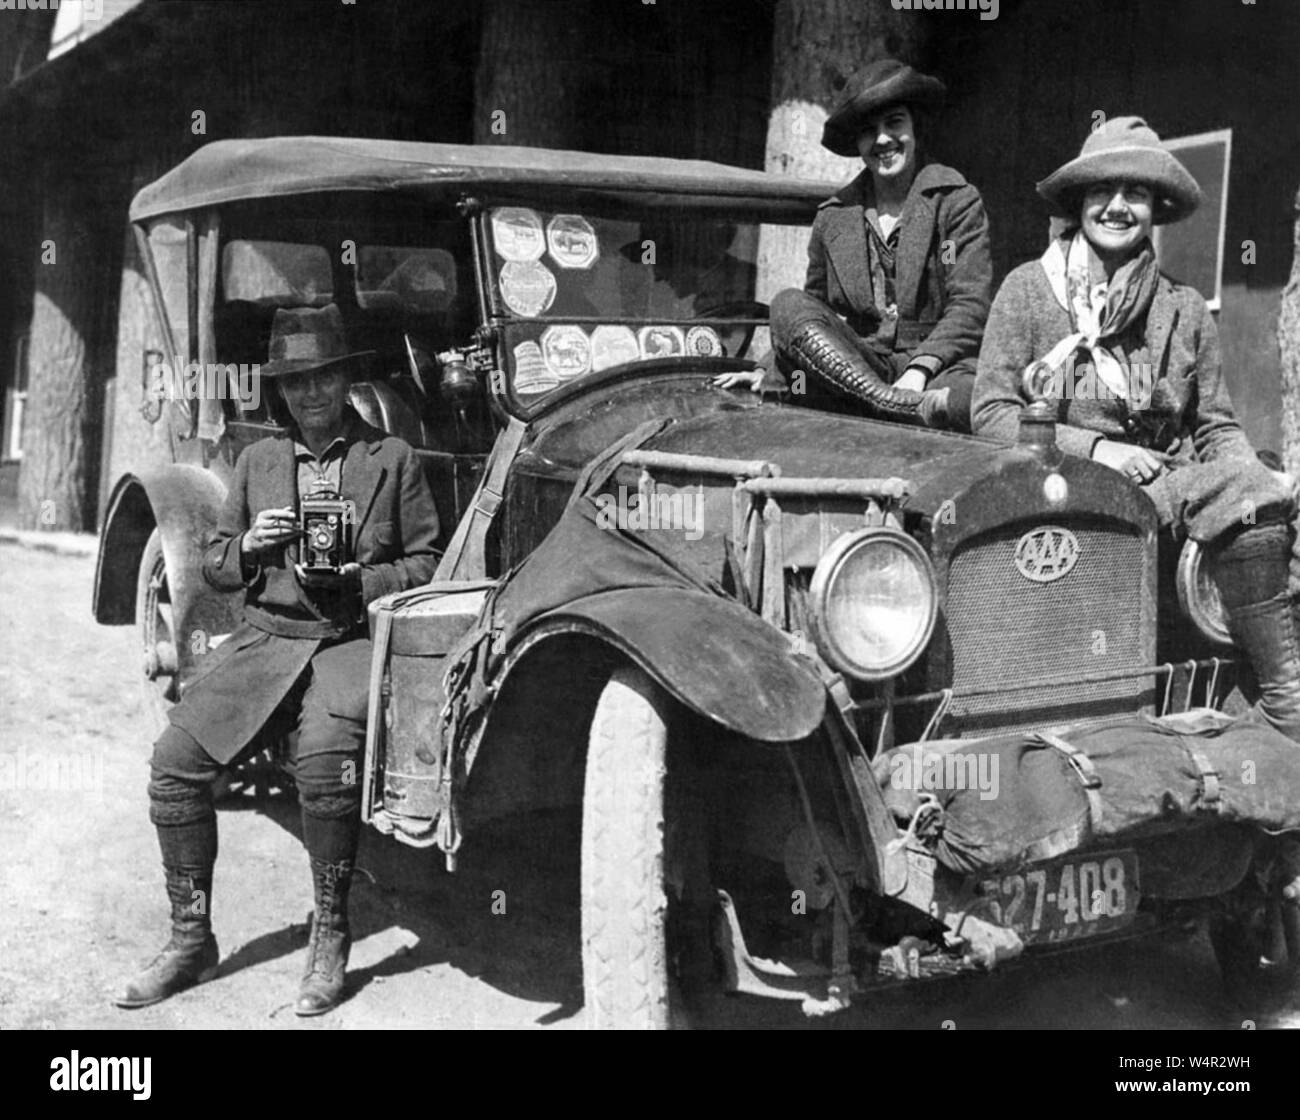 Author and photographer Mary Crehore Bedell (1870-1936) with traveling companions at Yellowstone National Park in 1922. Their vehicle bears a number of park stickers on the windshield along with a AAA Motor Club emblem on the grill. Bedell wrote the book, 'Modern Gypsies: The Story of a Twelve Thousand Mile Motor Camping Trip Encircling the United States' which was published in 1924. Stock Photo